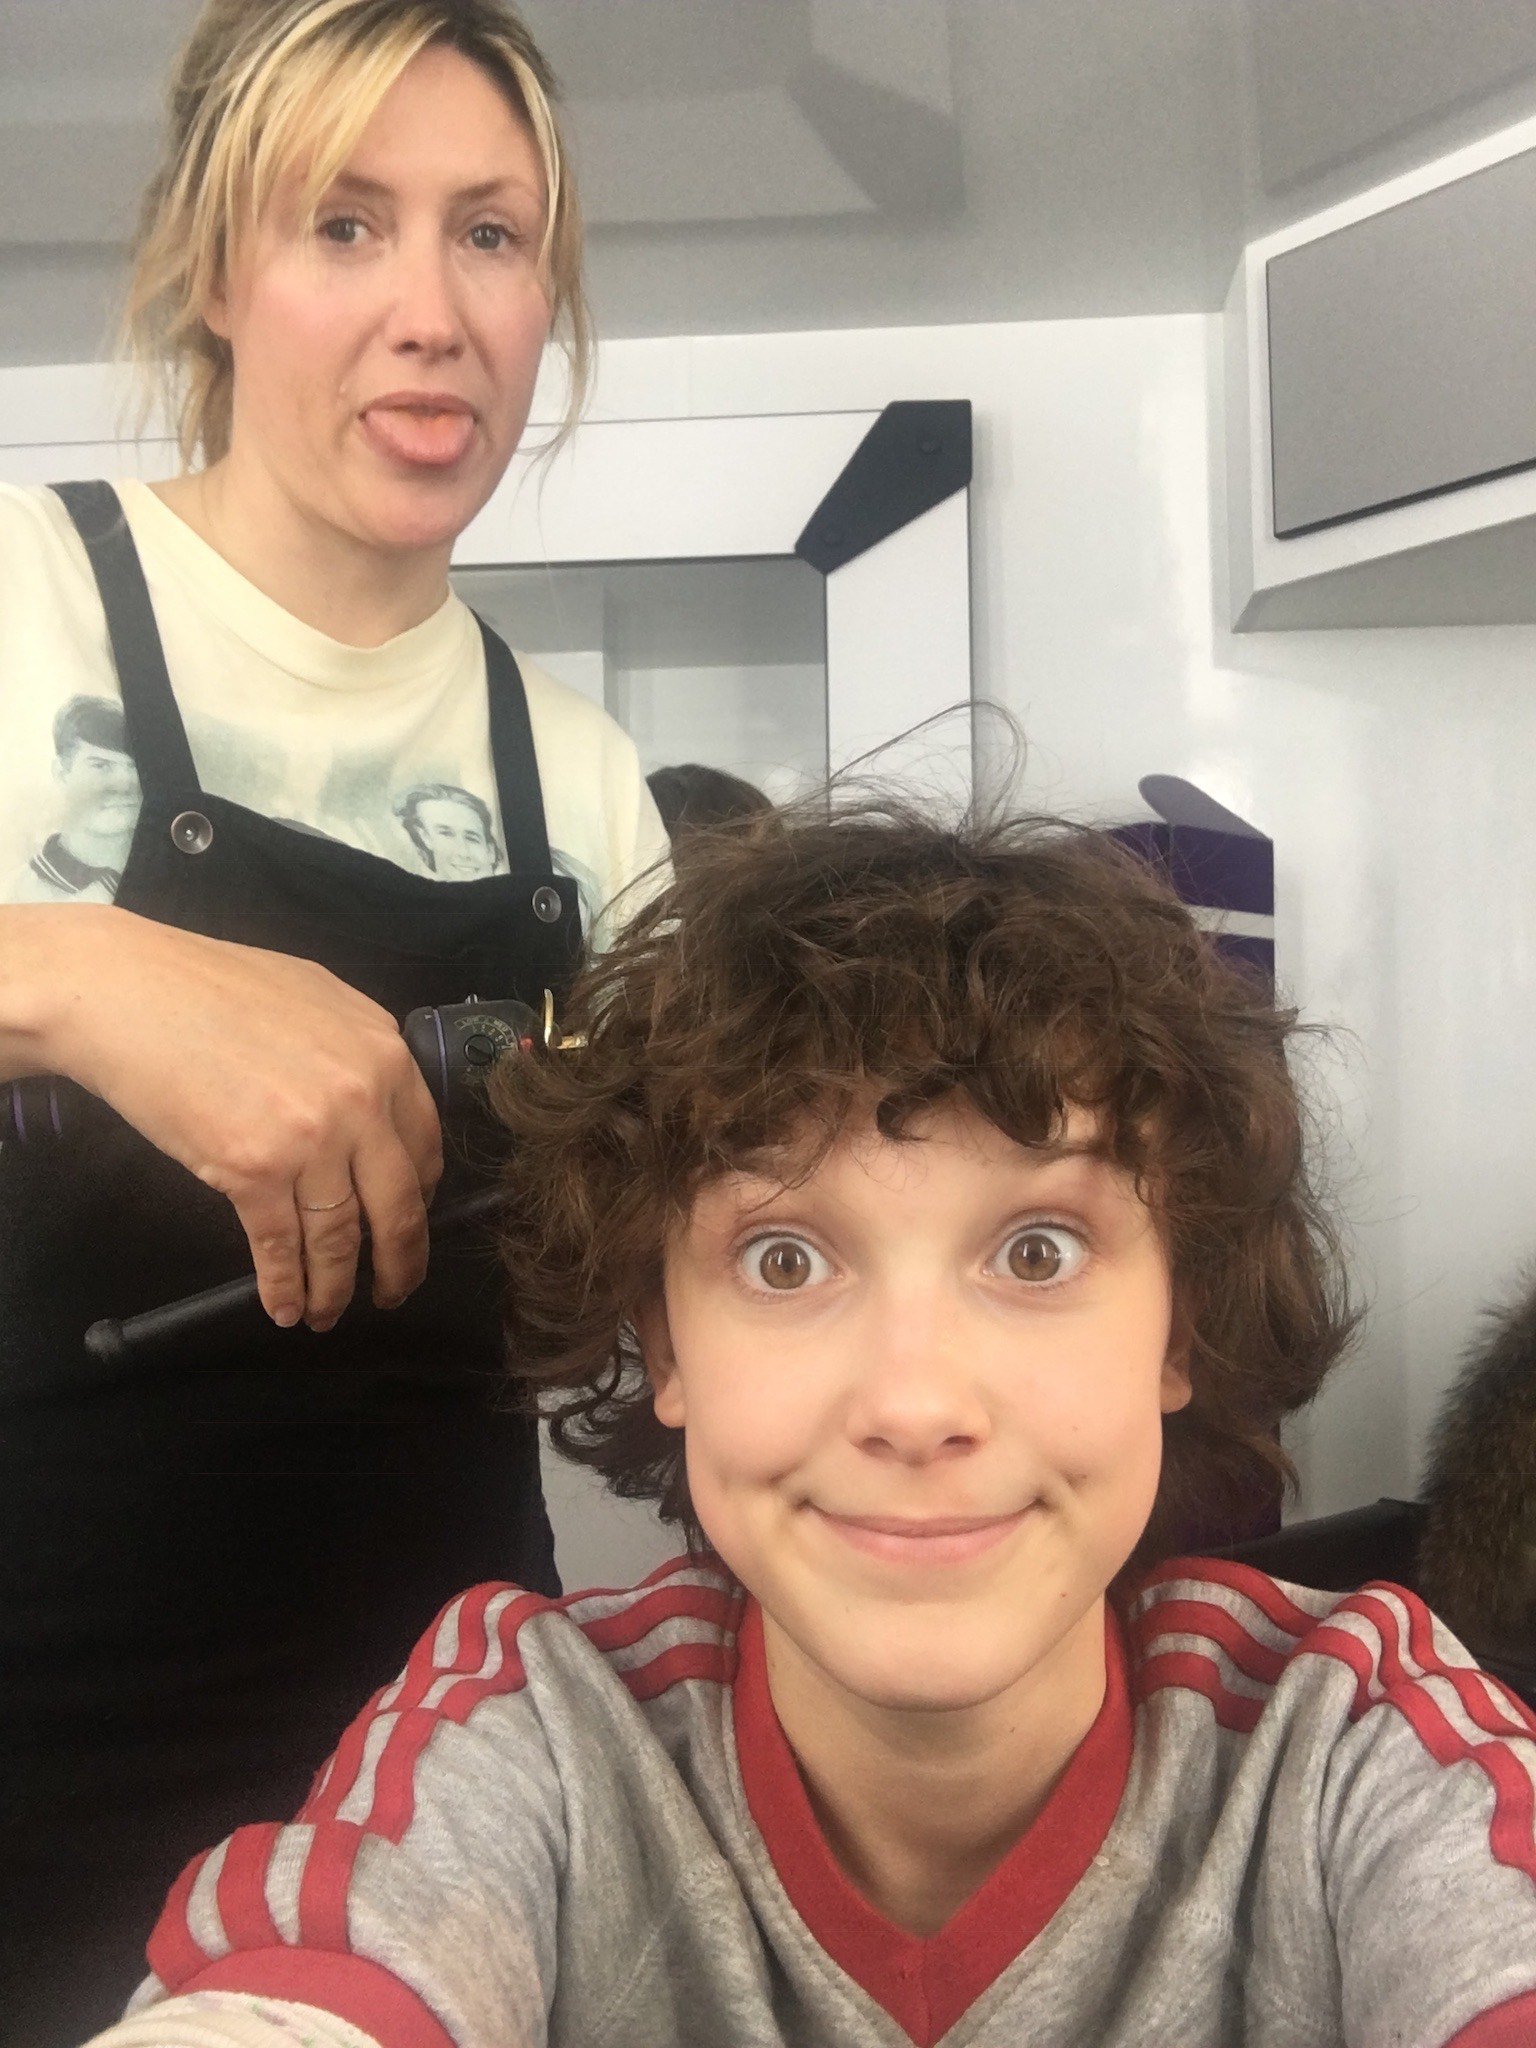 The 'Stranger Things' hair department head reveals how she